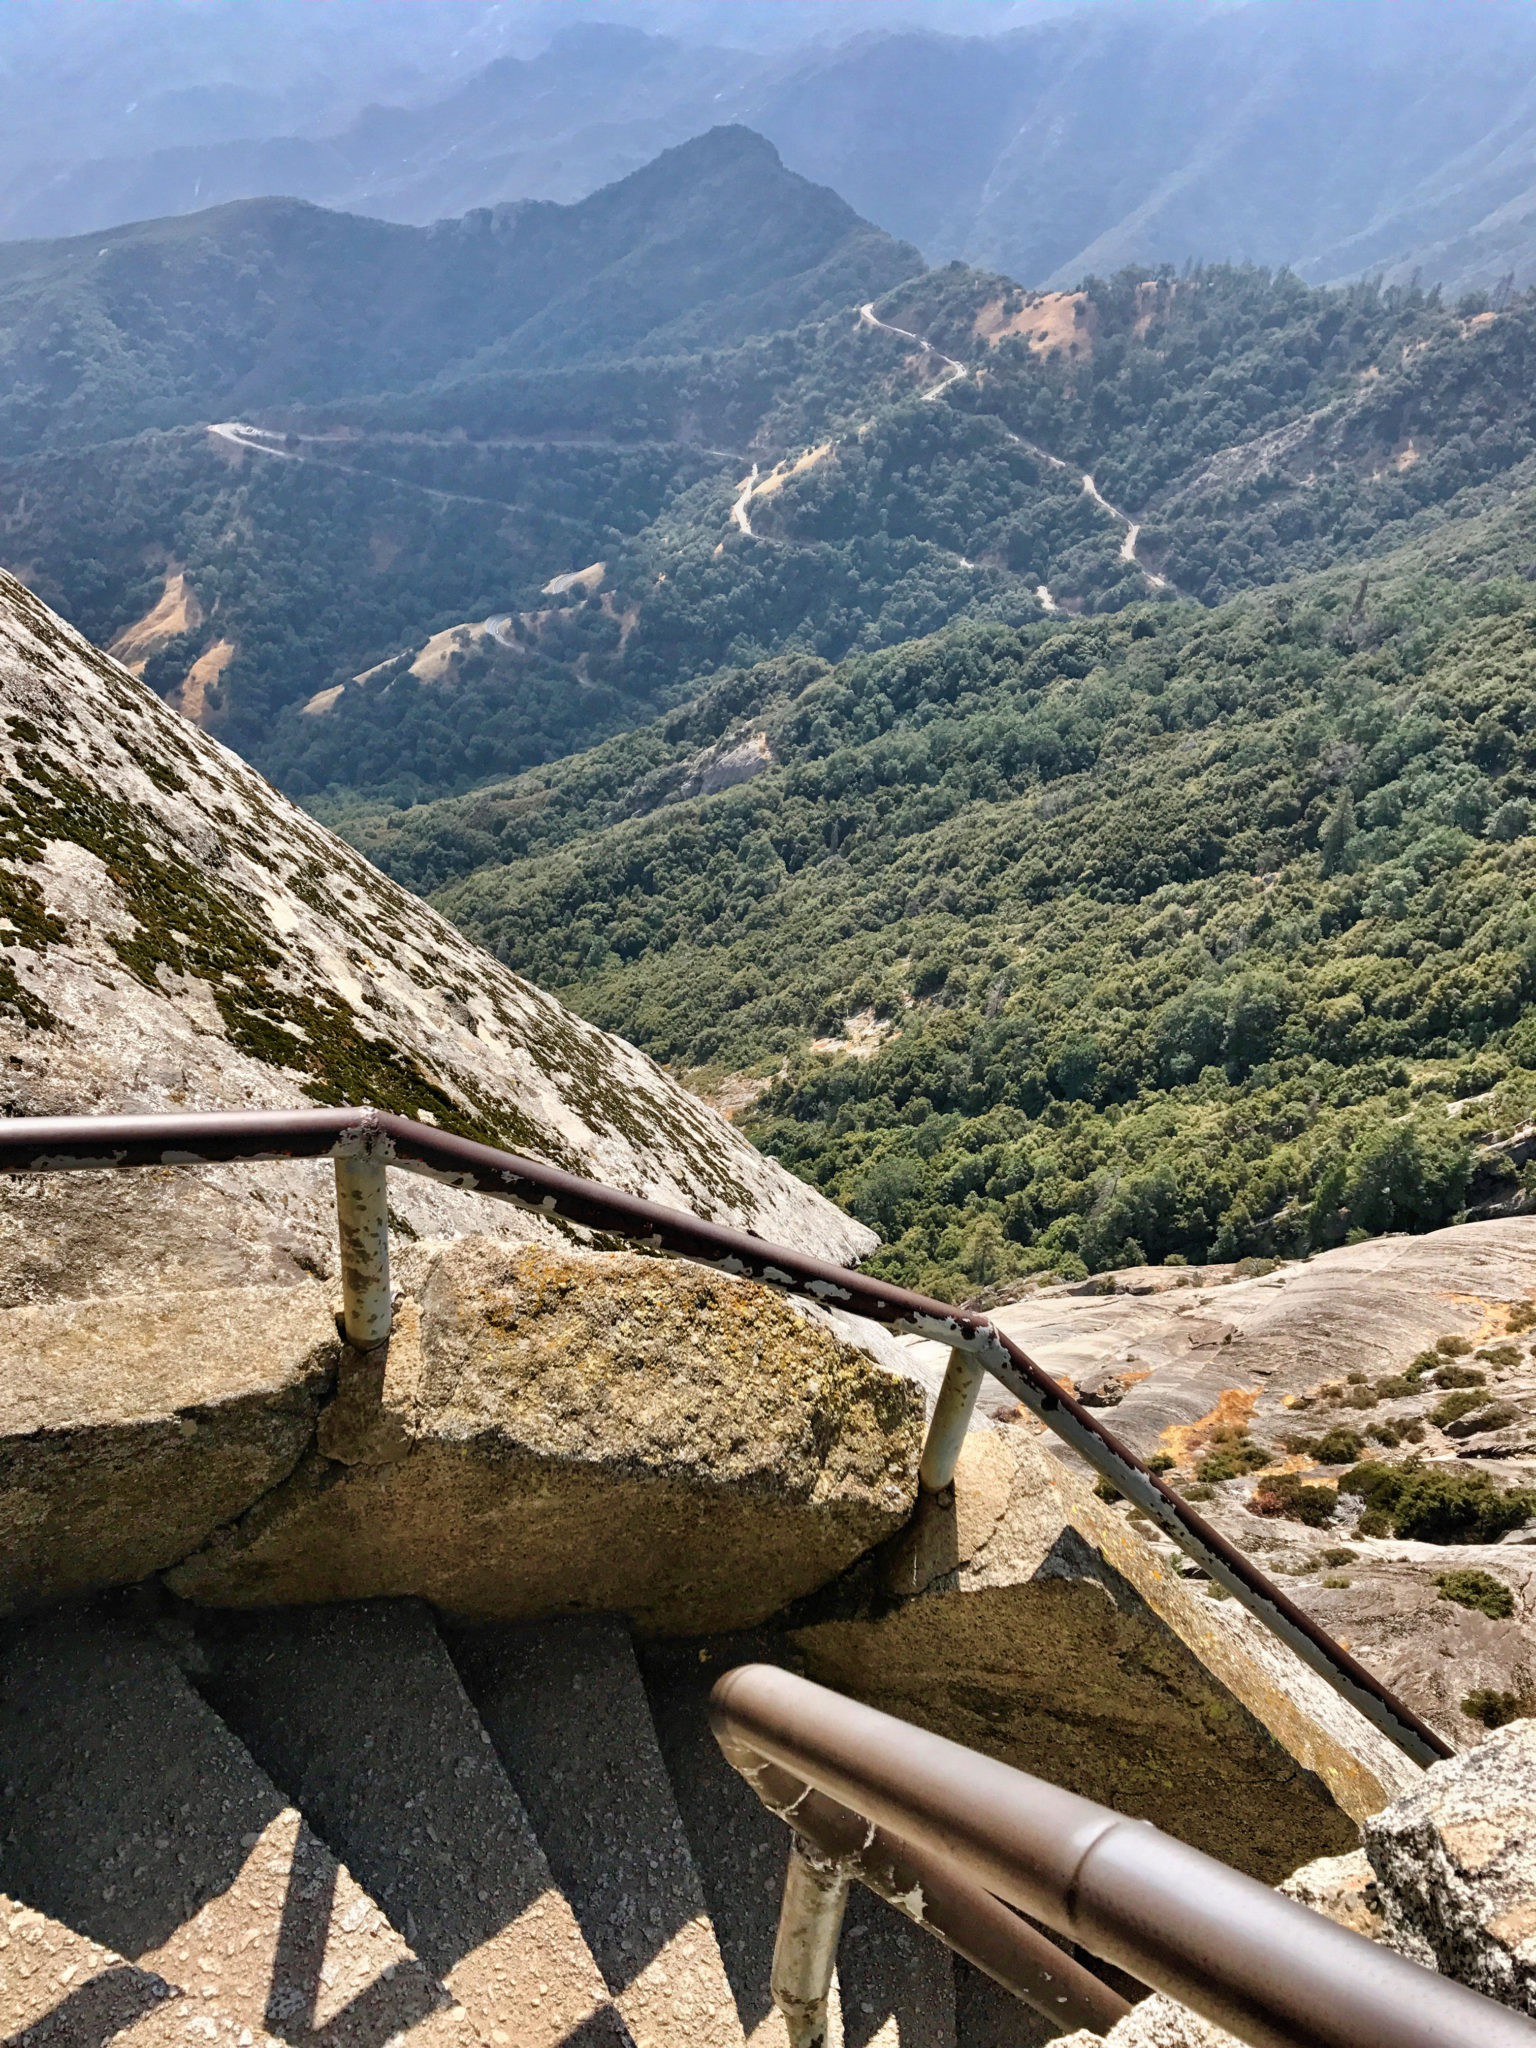 On the stairs of Moro Rock Trail